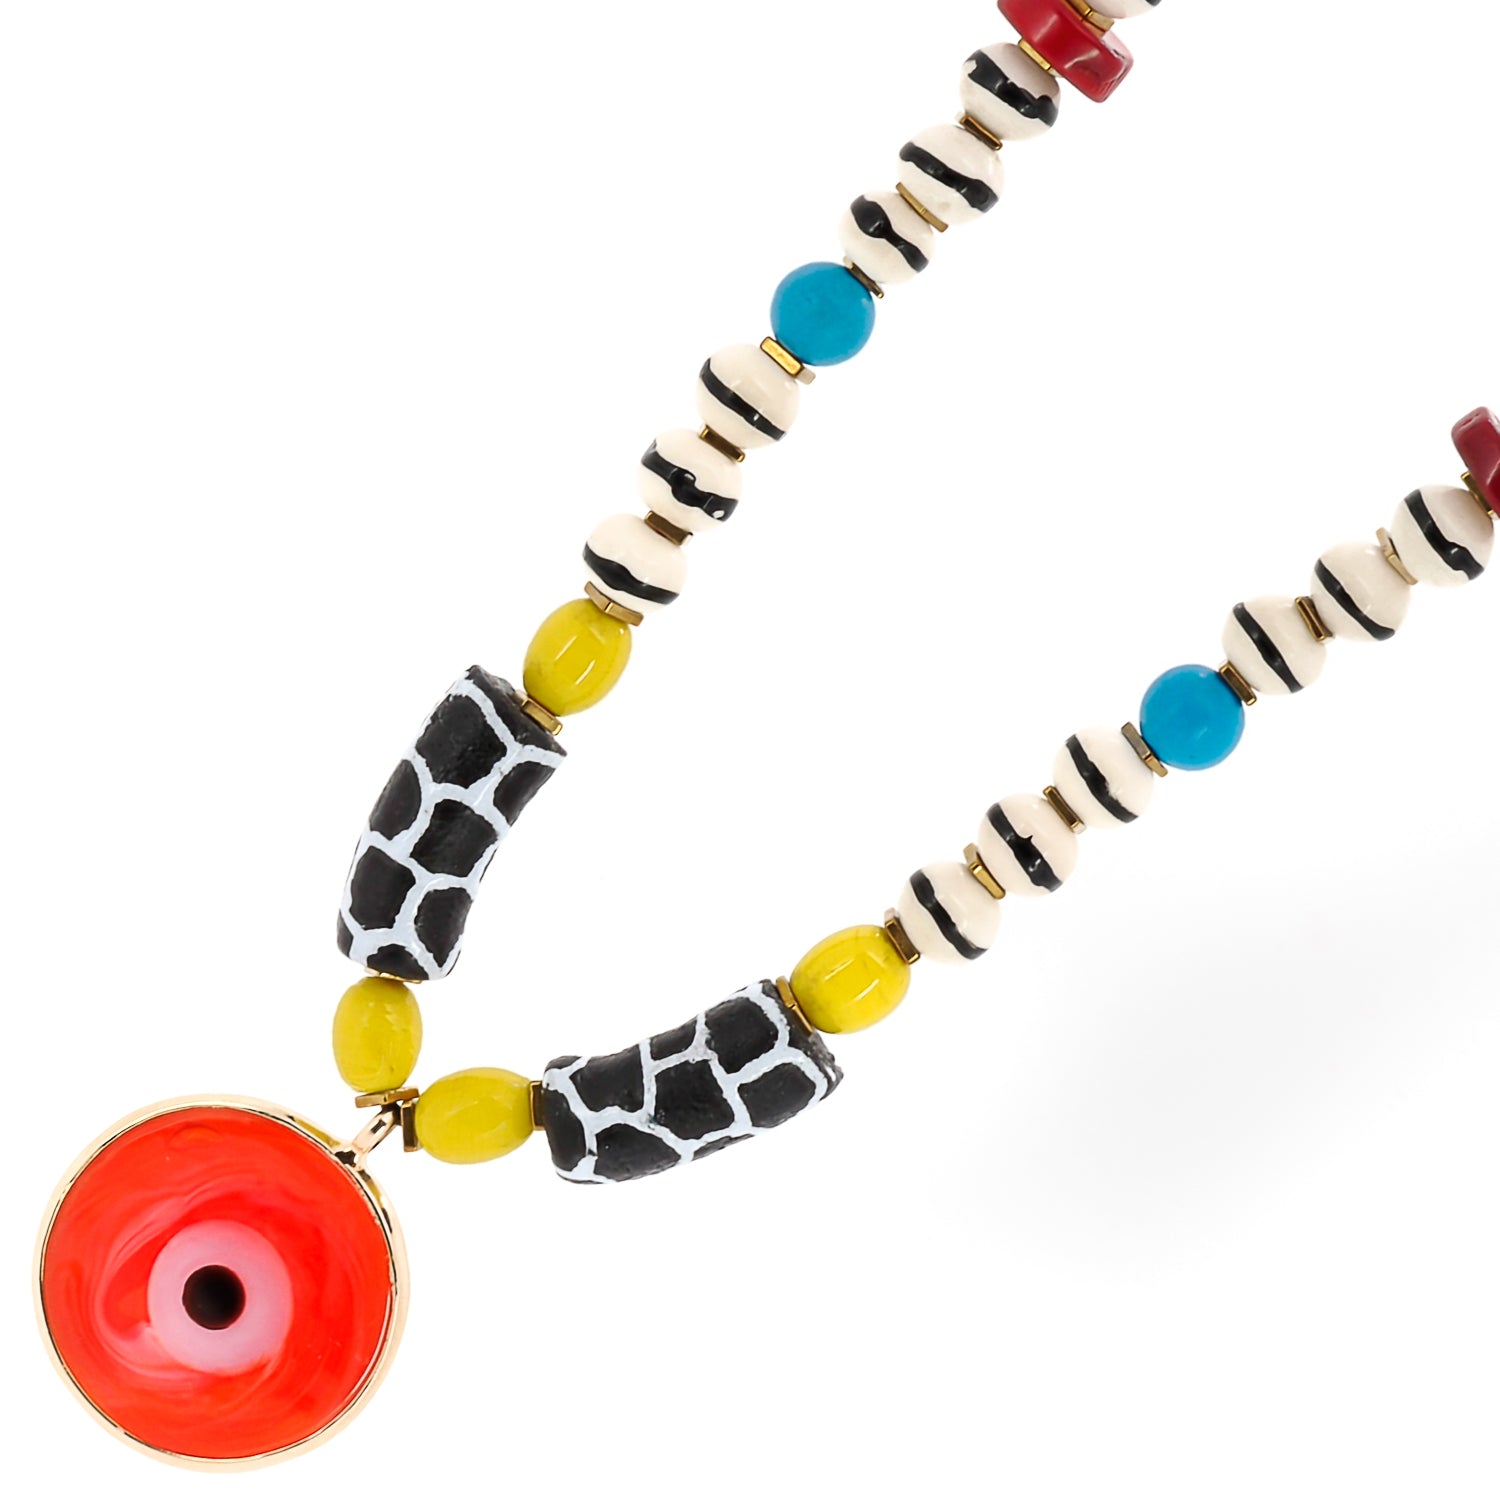 Close-up shot of the Nepal yellow beads, symbolizing happiness and optimism in the African Yellow Happiness Necklace.